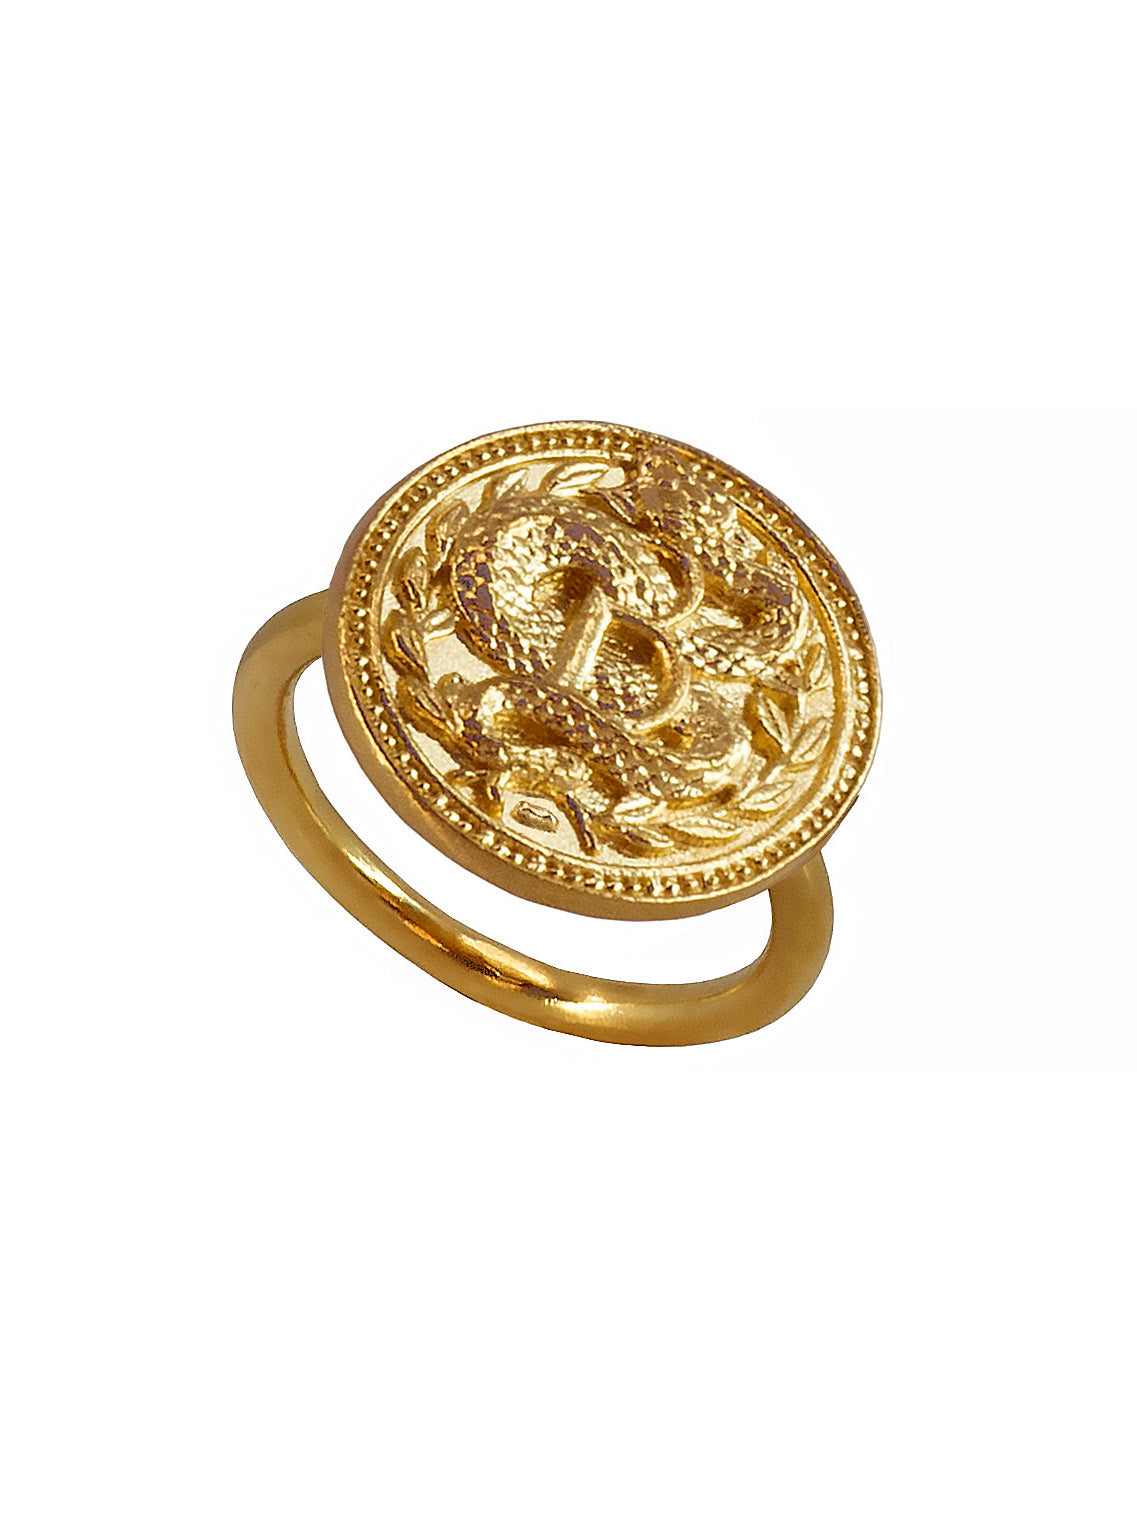 Blood type B Negative Ring. 23ct Gold plated Sterling Silver.Grupo sanguineo Anillo, Dorado